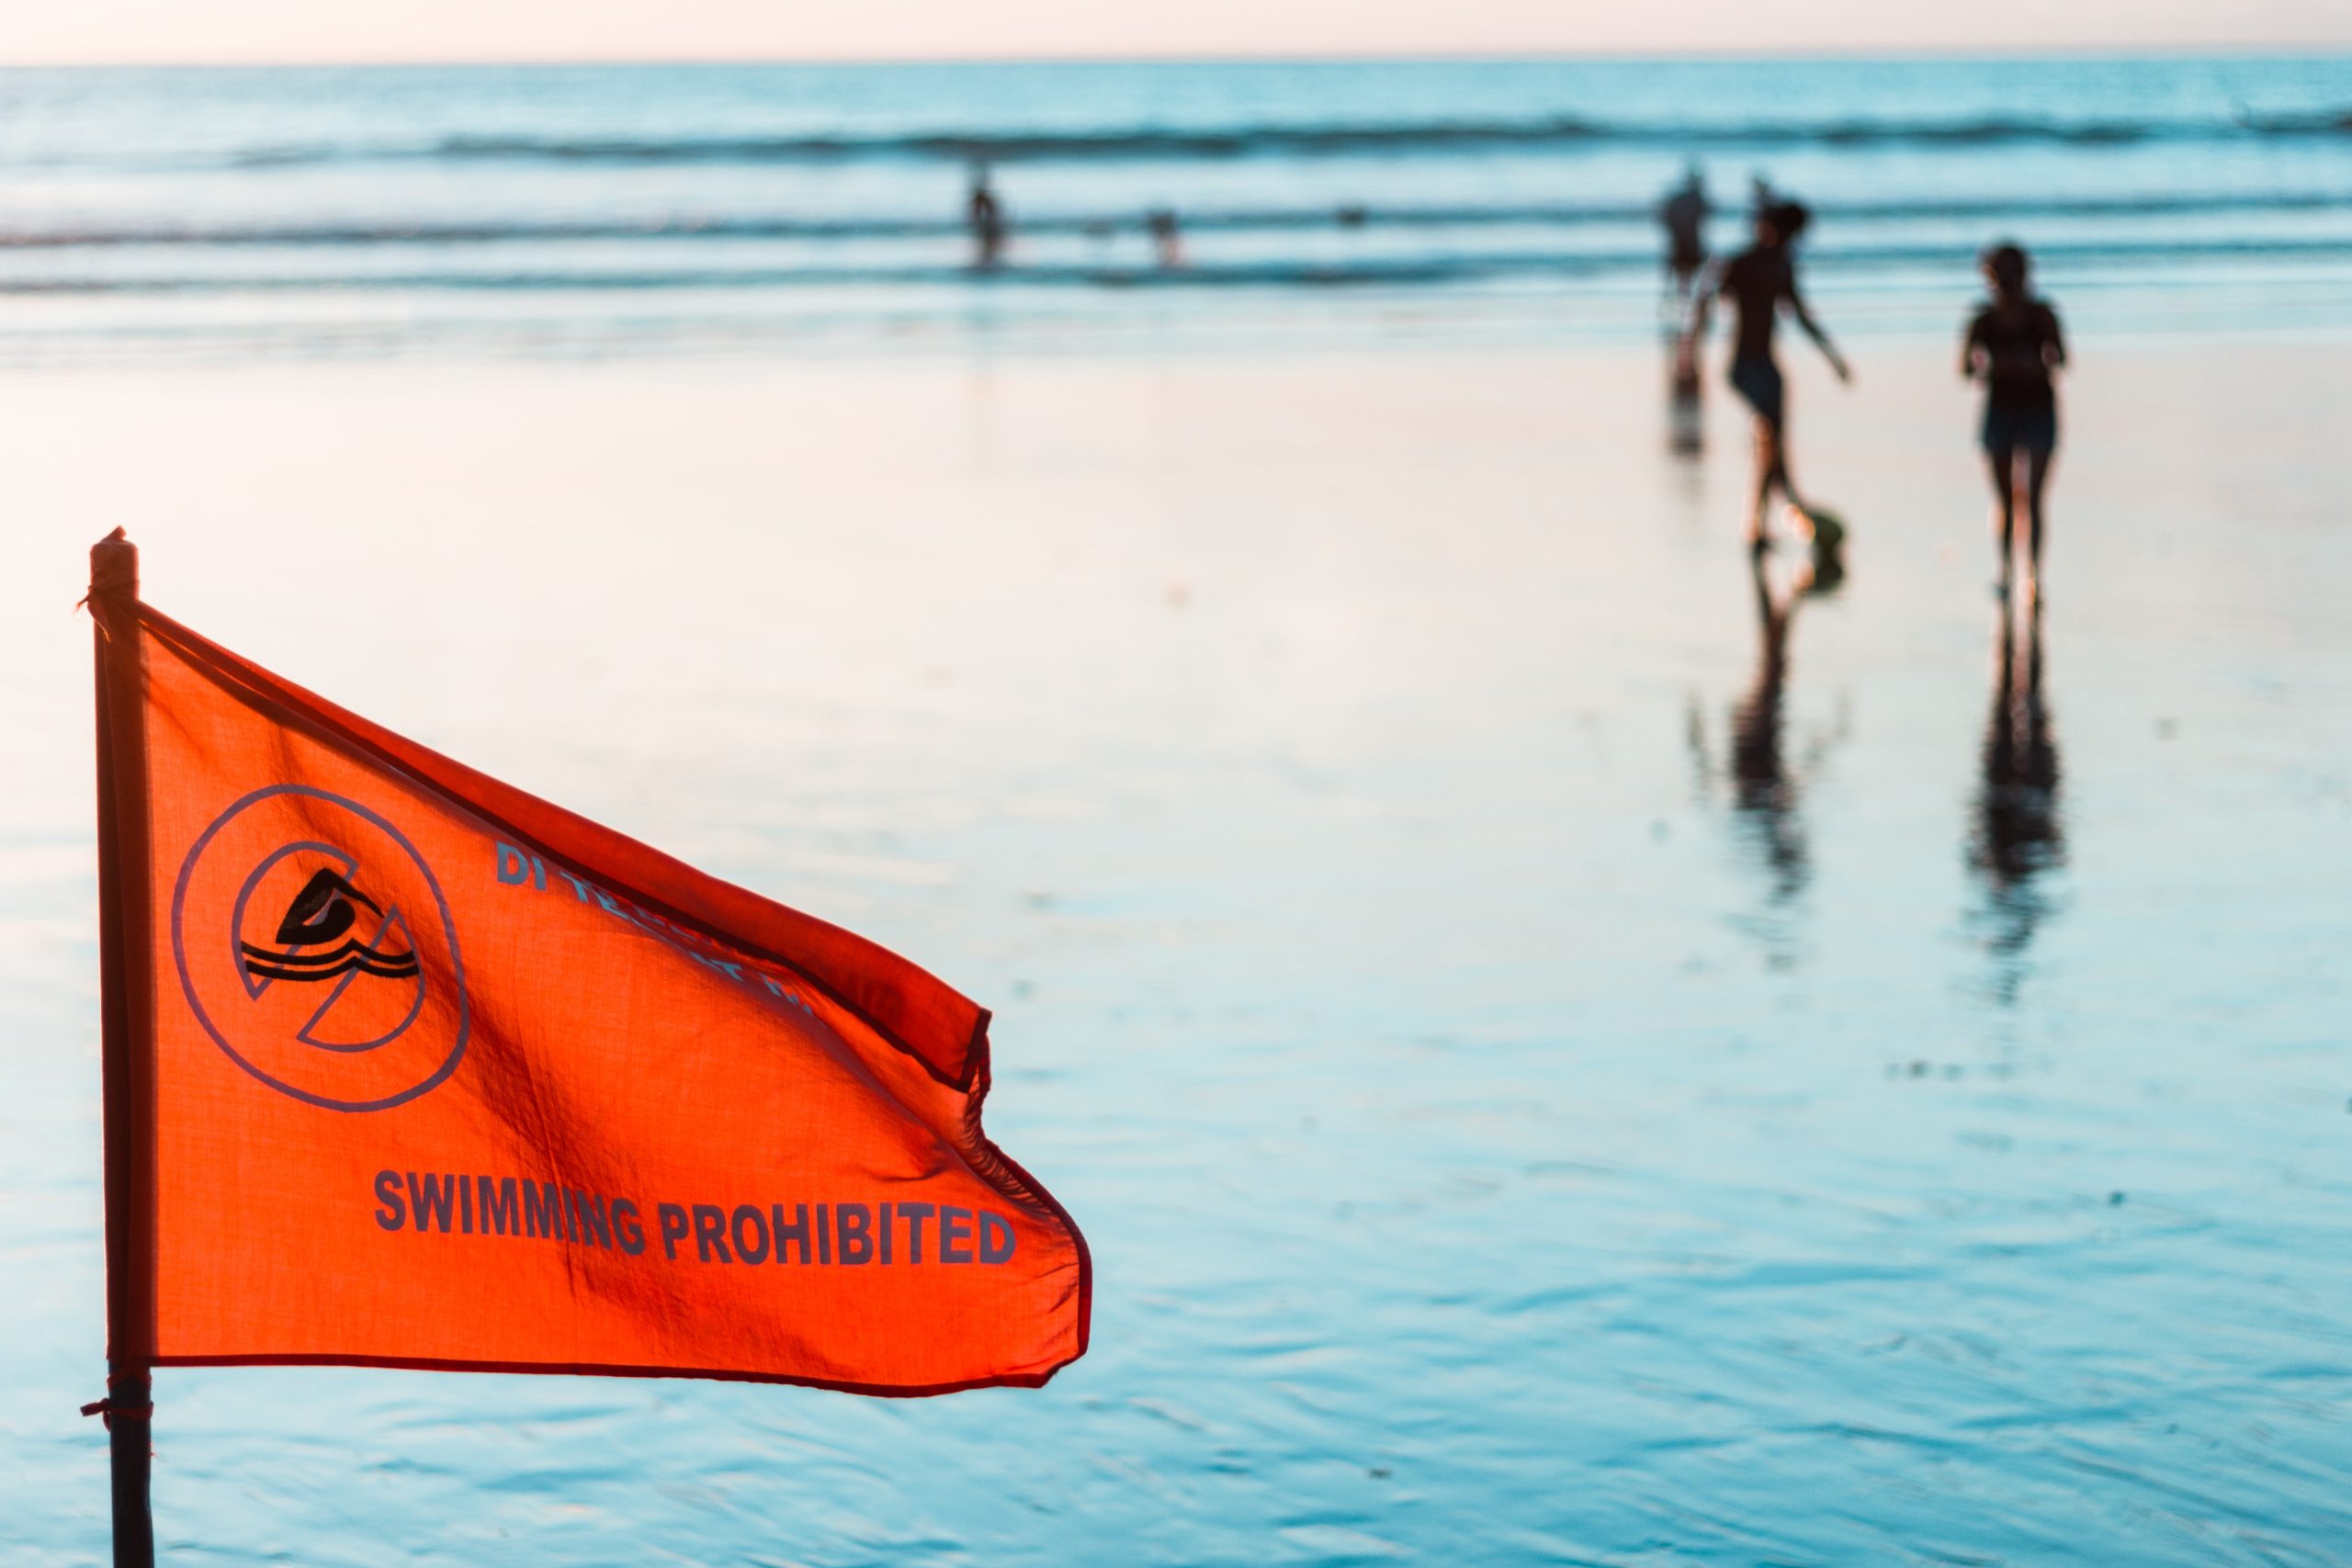 A red flag with the warning "swimming prohibited" flies at the beach. Children play in the water behind it.